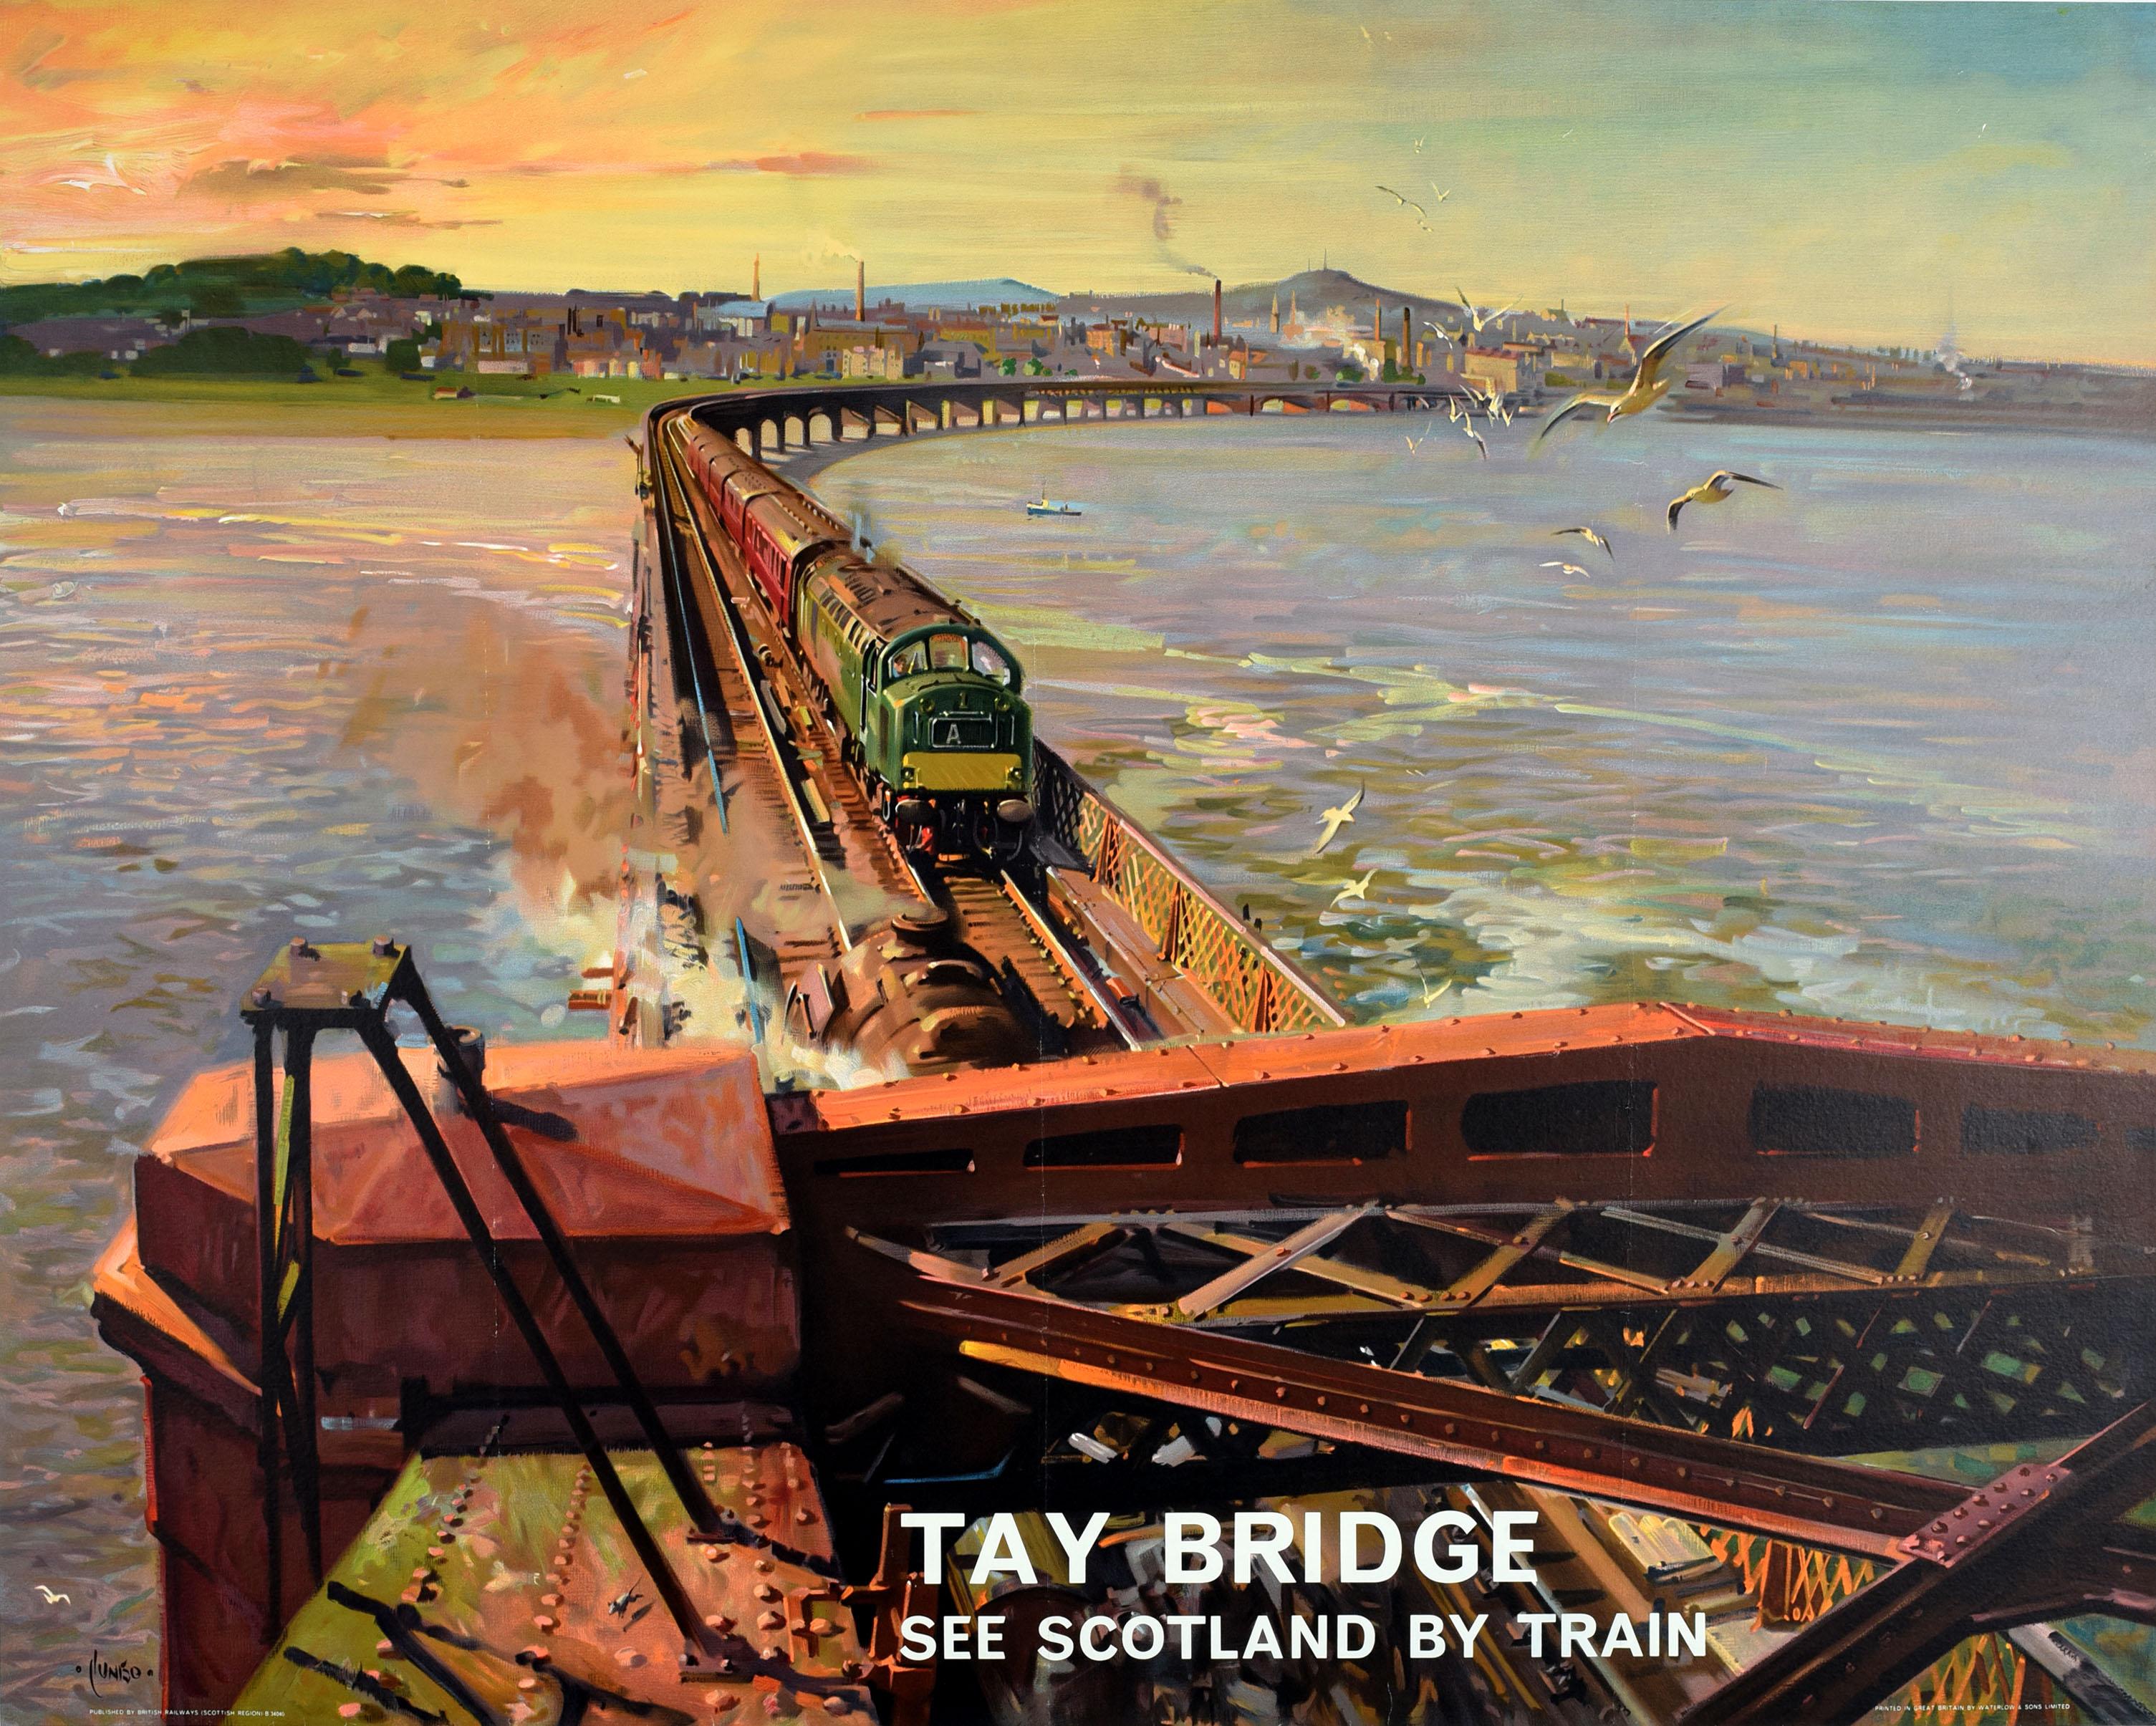 Terence Cuneo Print - Original Vintage Railway Poster Tay Bridge See Scotland By Train Scenic Painting